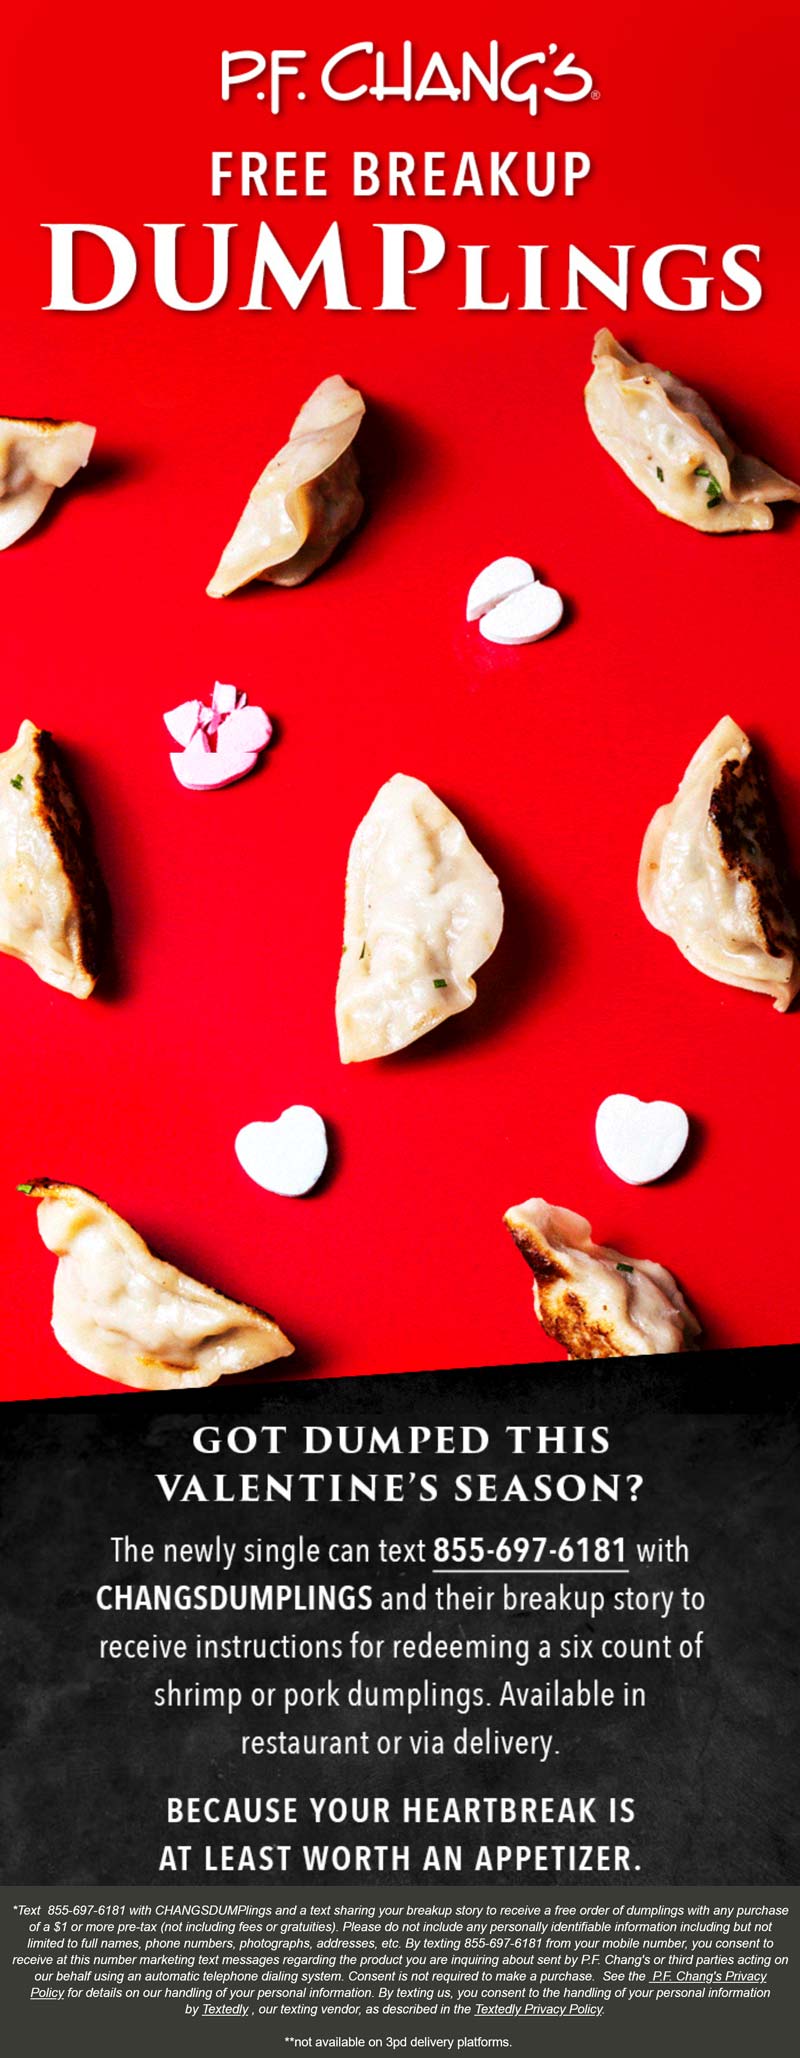 P.F. Changs restaurants Coupon  Text CHANGSDUMPlings for free dumplings with any order at P.F. Changs bistro restaurants #pfchangs 